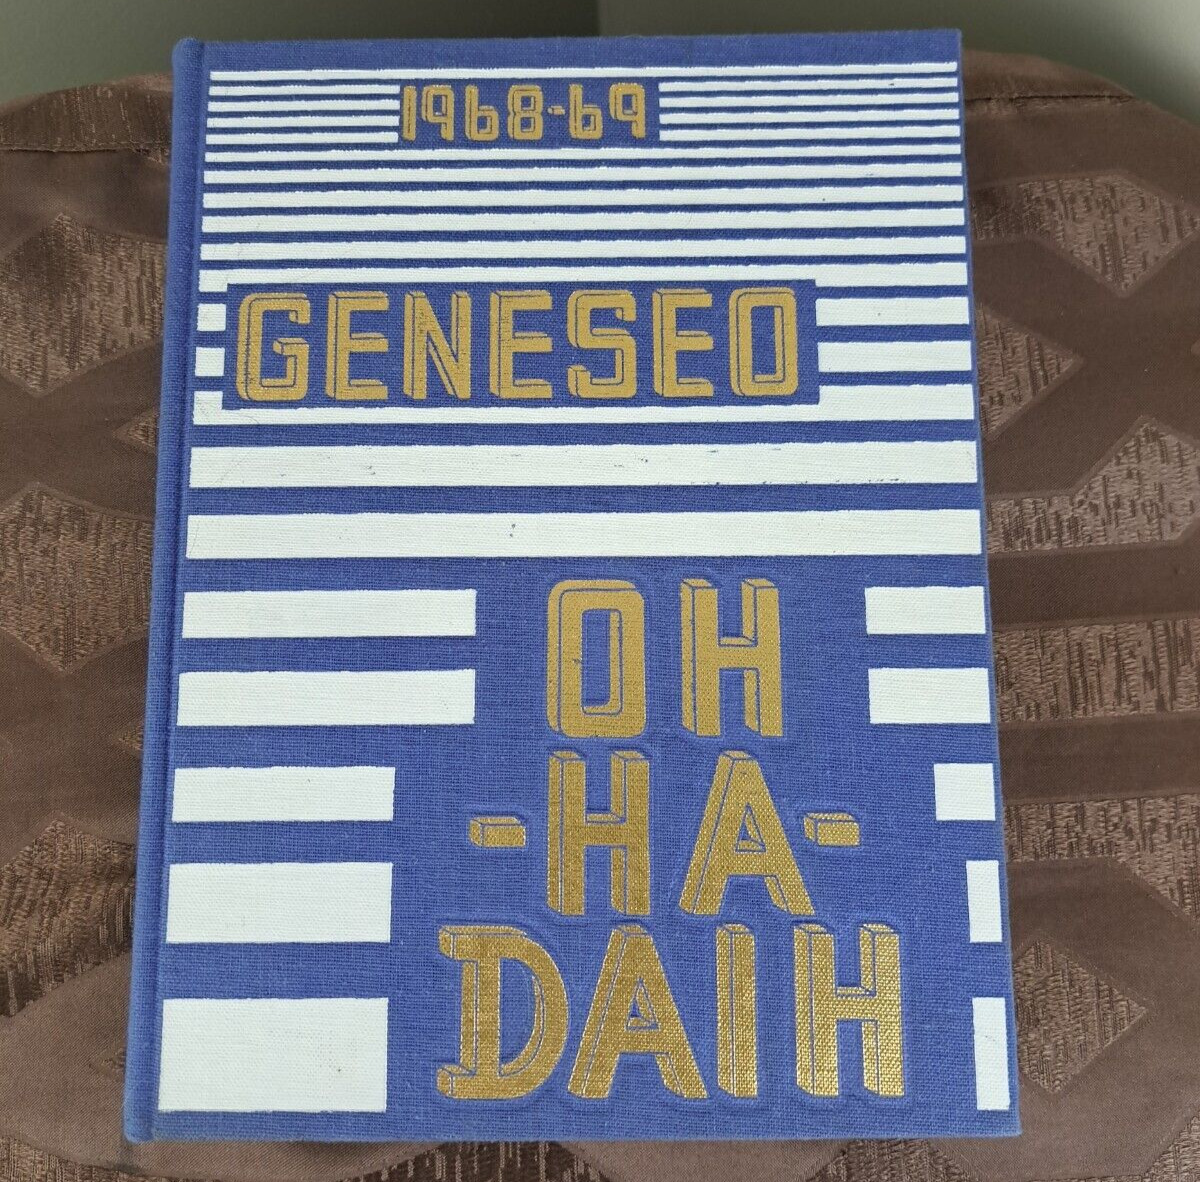 SUNY Geneseo Oh Ha Daih Yearbook 1968-69 State University of NY Vintage Photos